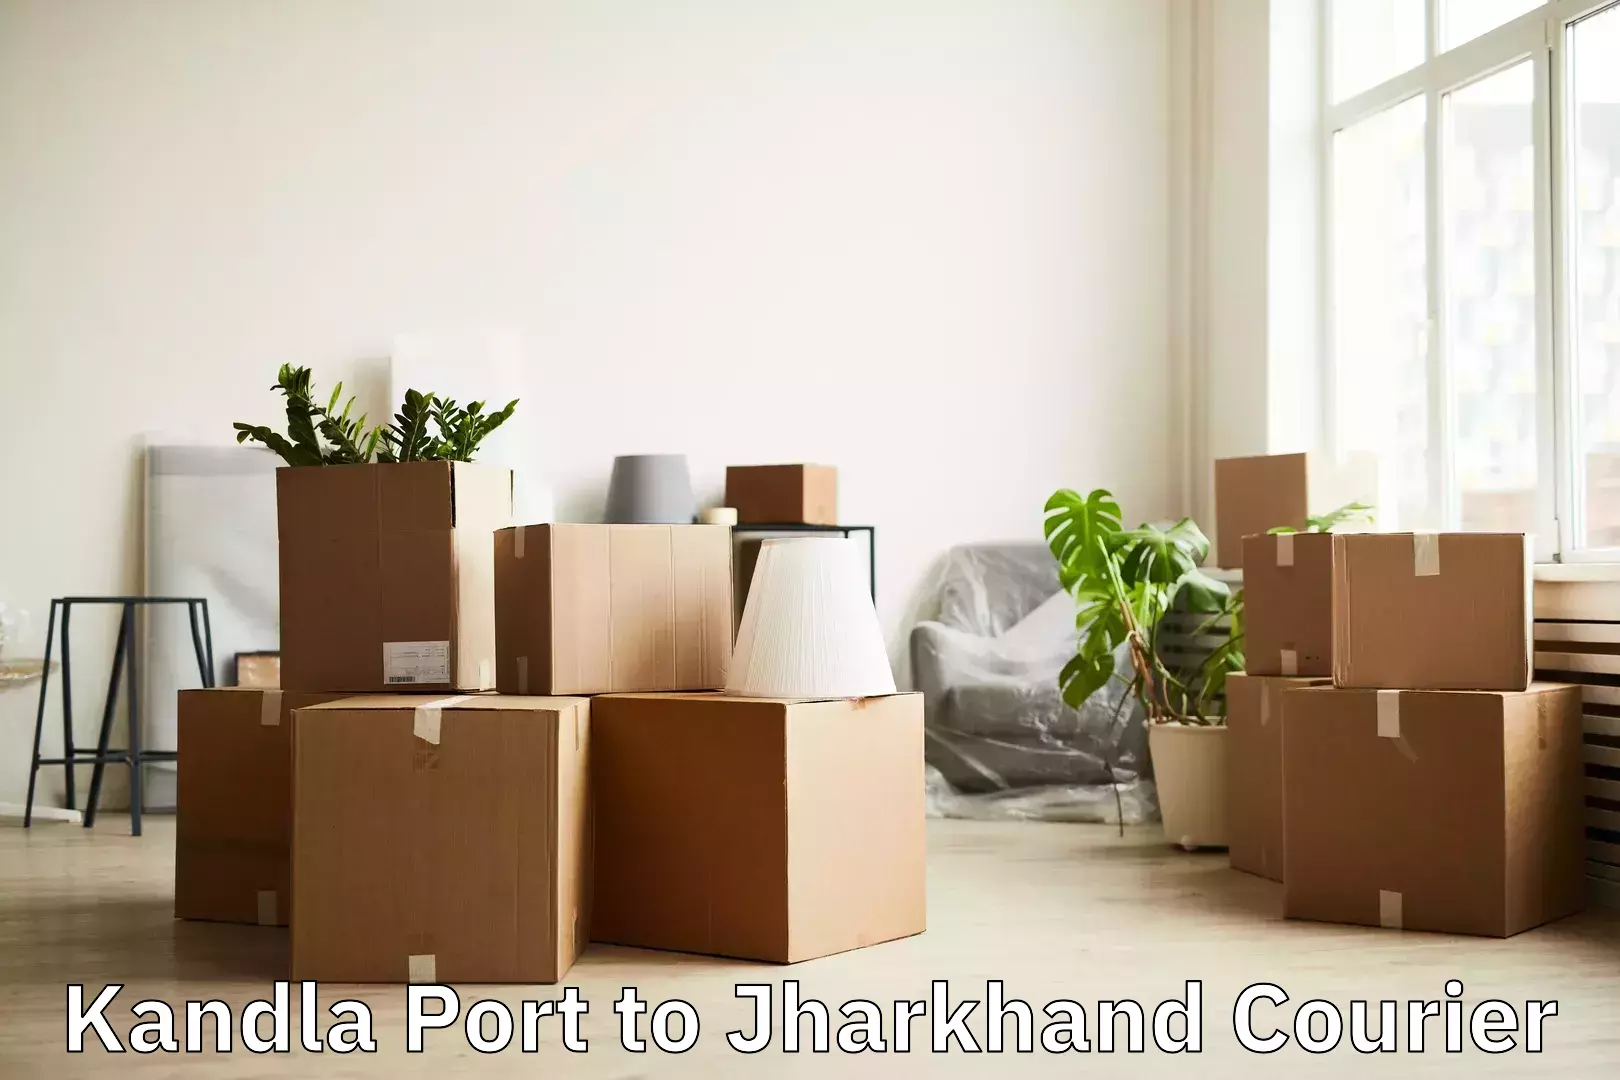 Luggage storage and delivery Kandla Port to Ranchi